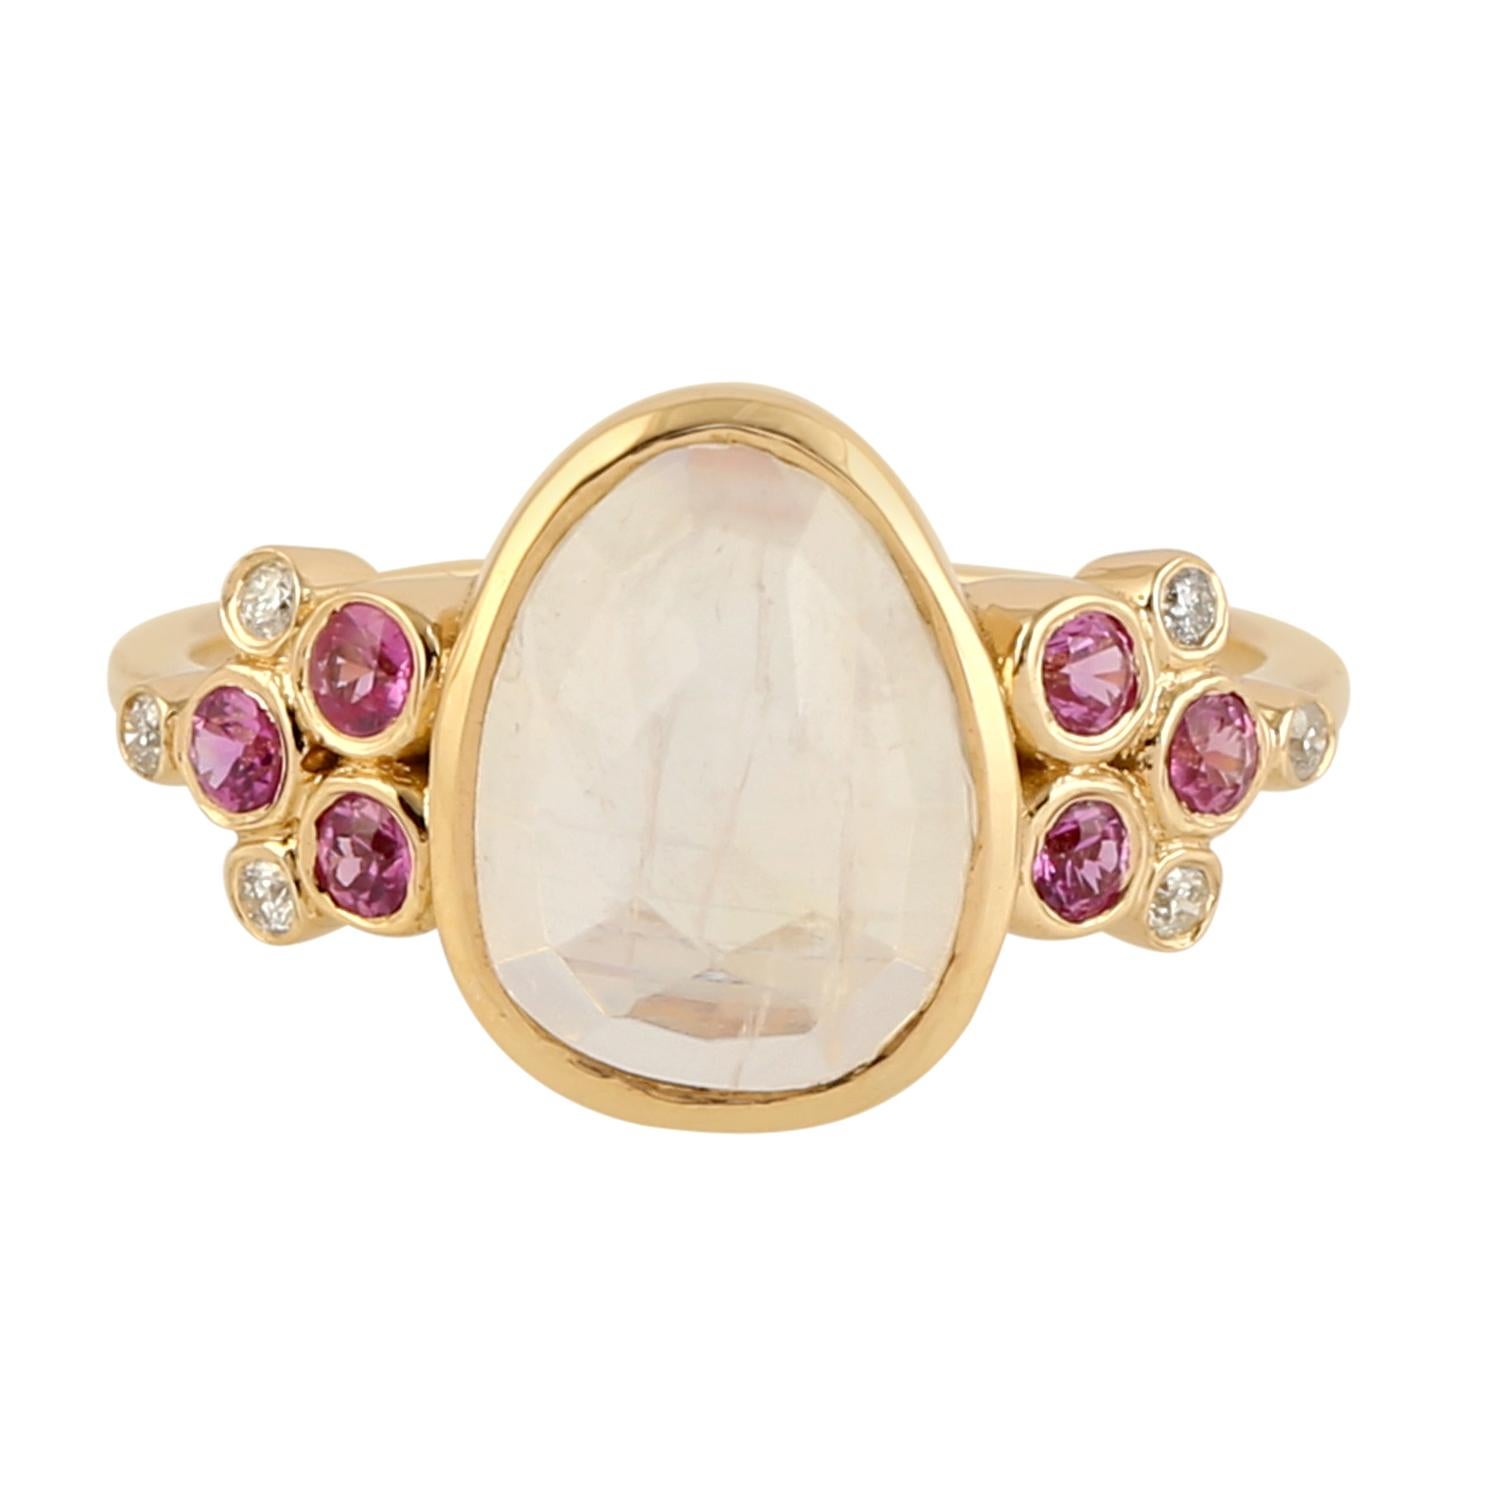 This ring has been meticulously crafted from 18-karat yellow gold. It is set in 2.26 carats of moonstone, .32 carats pink sapphire and .06 carats of sparkling diamonds. Also available in Aquamarine.

The ring is a size 7 and may be resized to larger